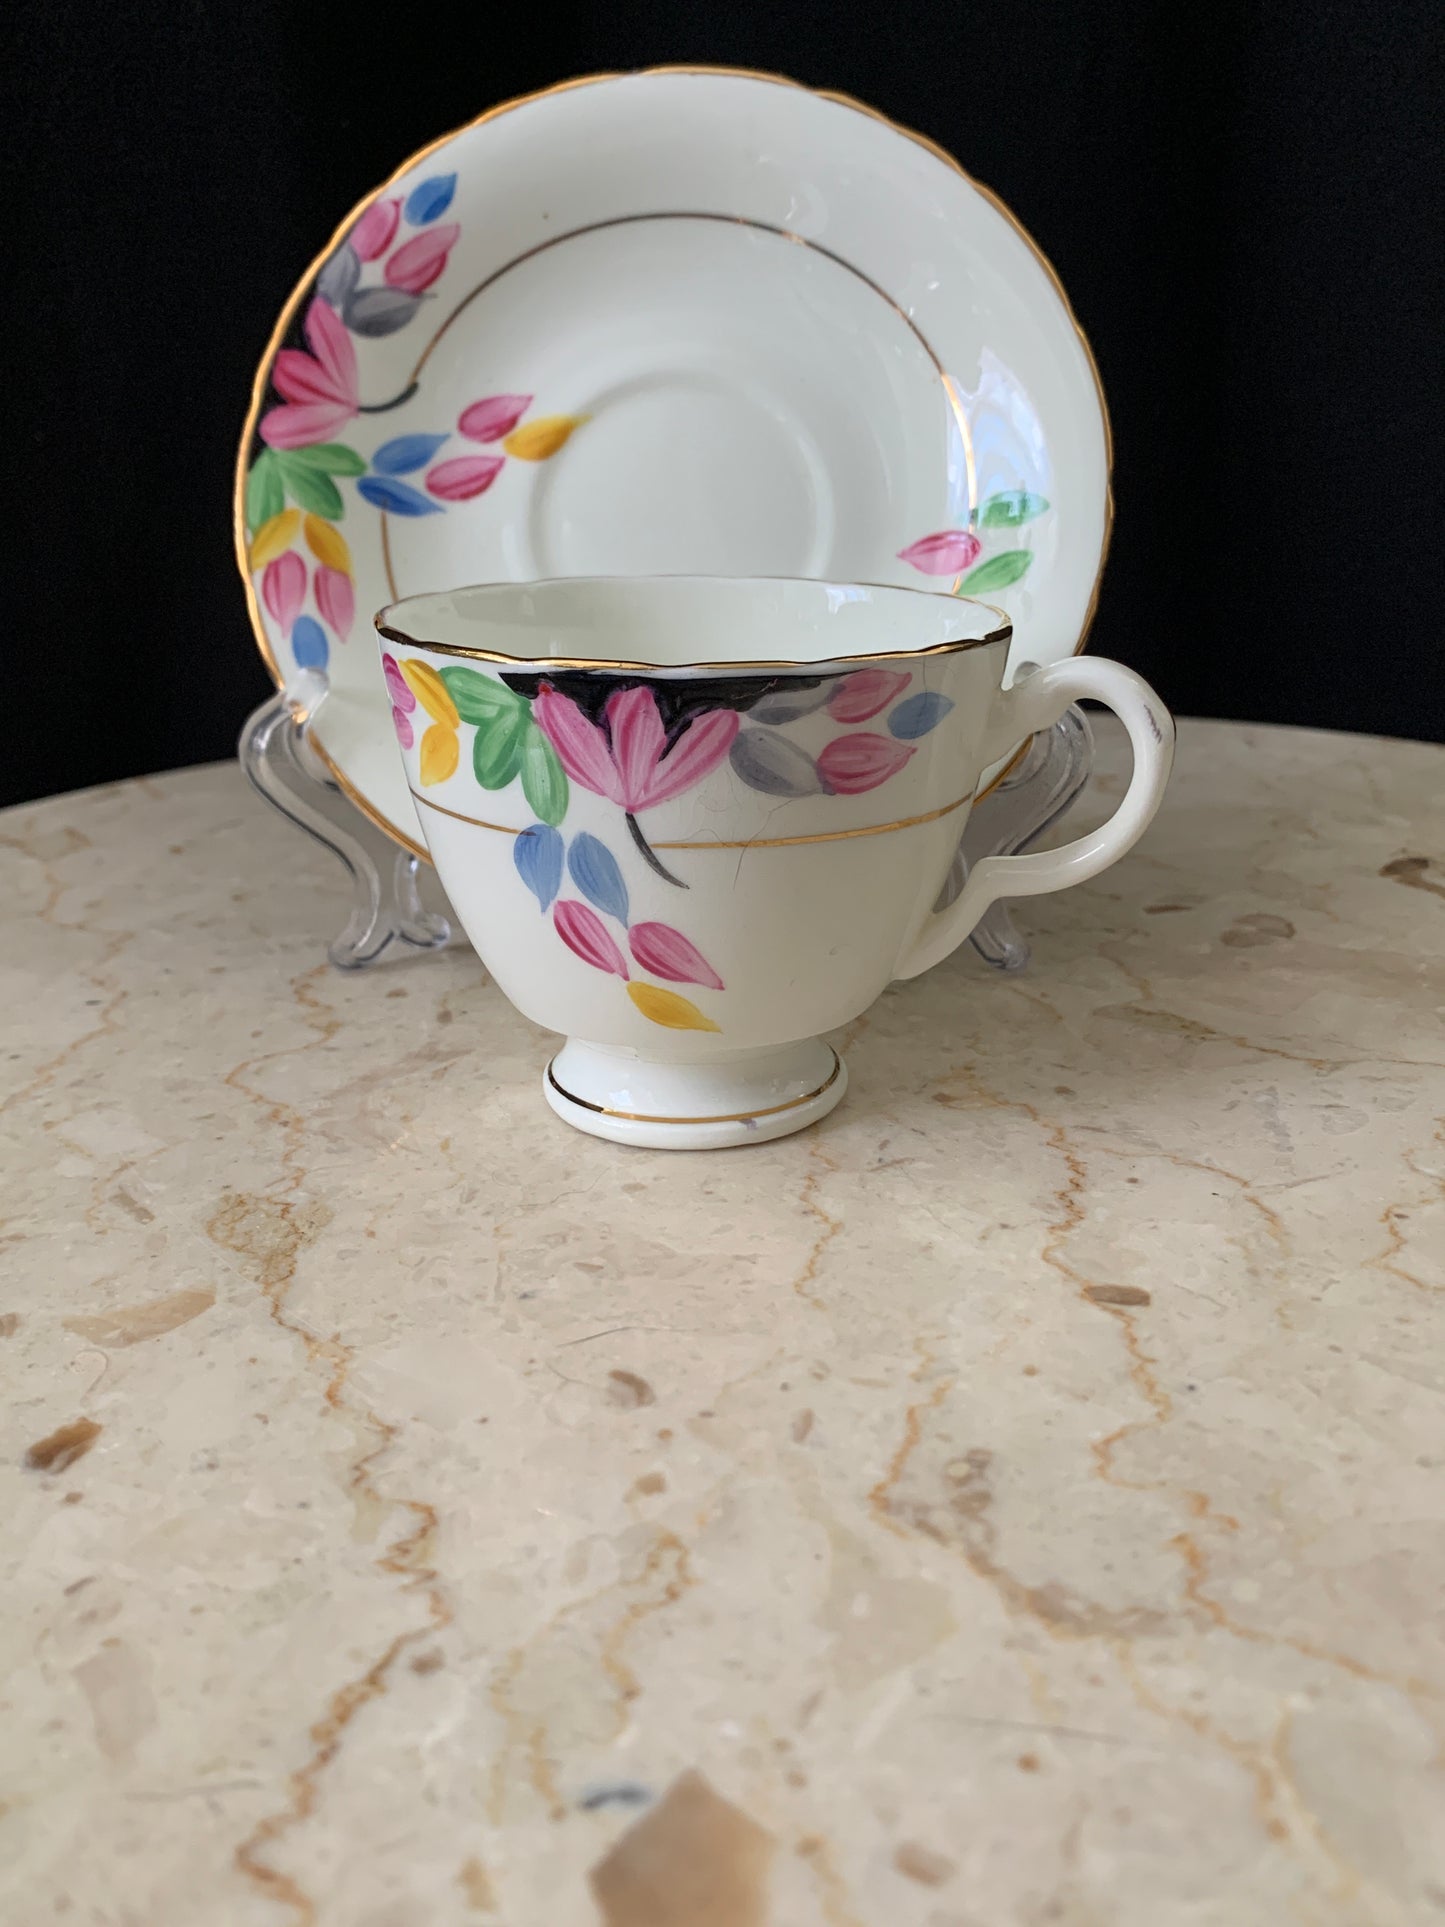 Hand Painted Floral Vintage Teacup and Saucer Set